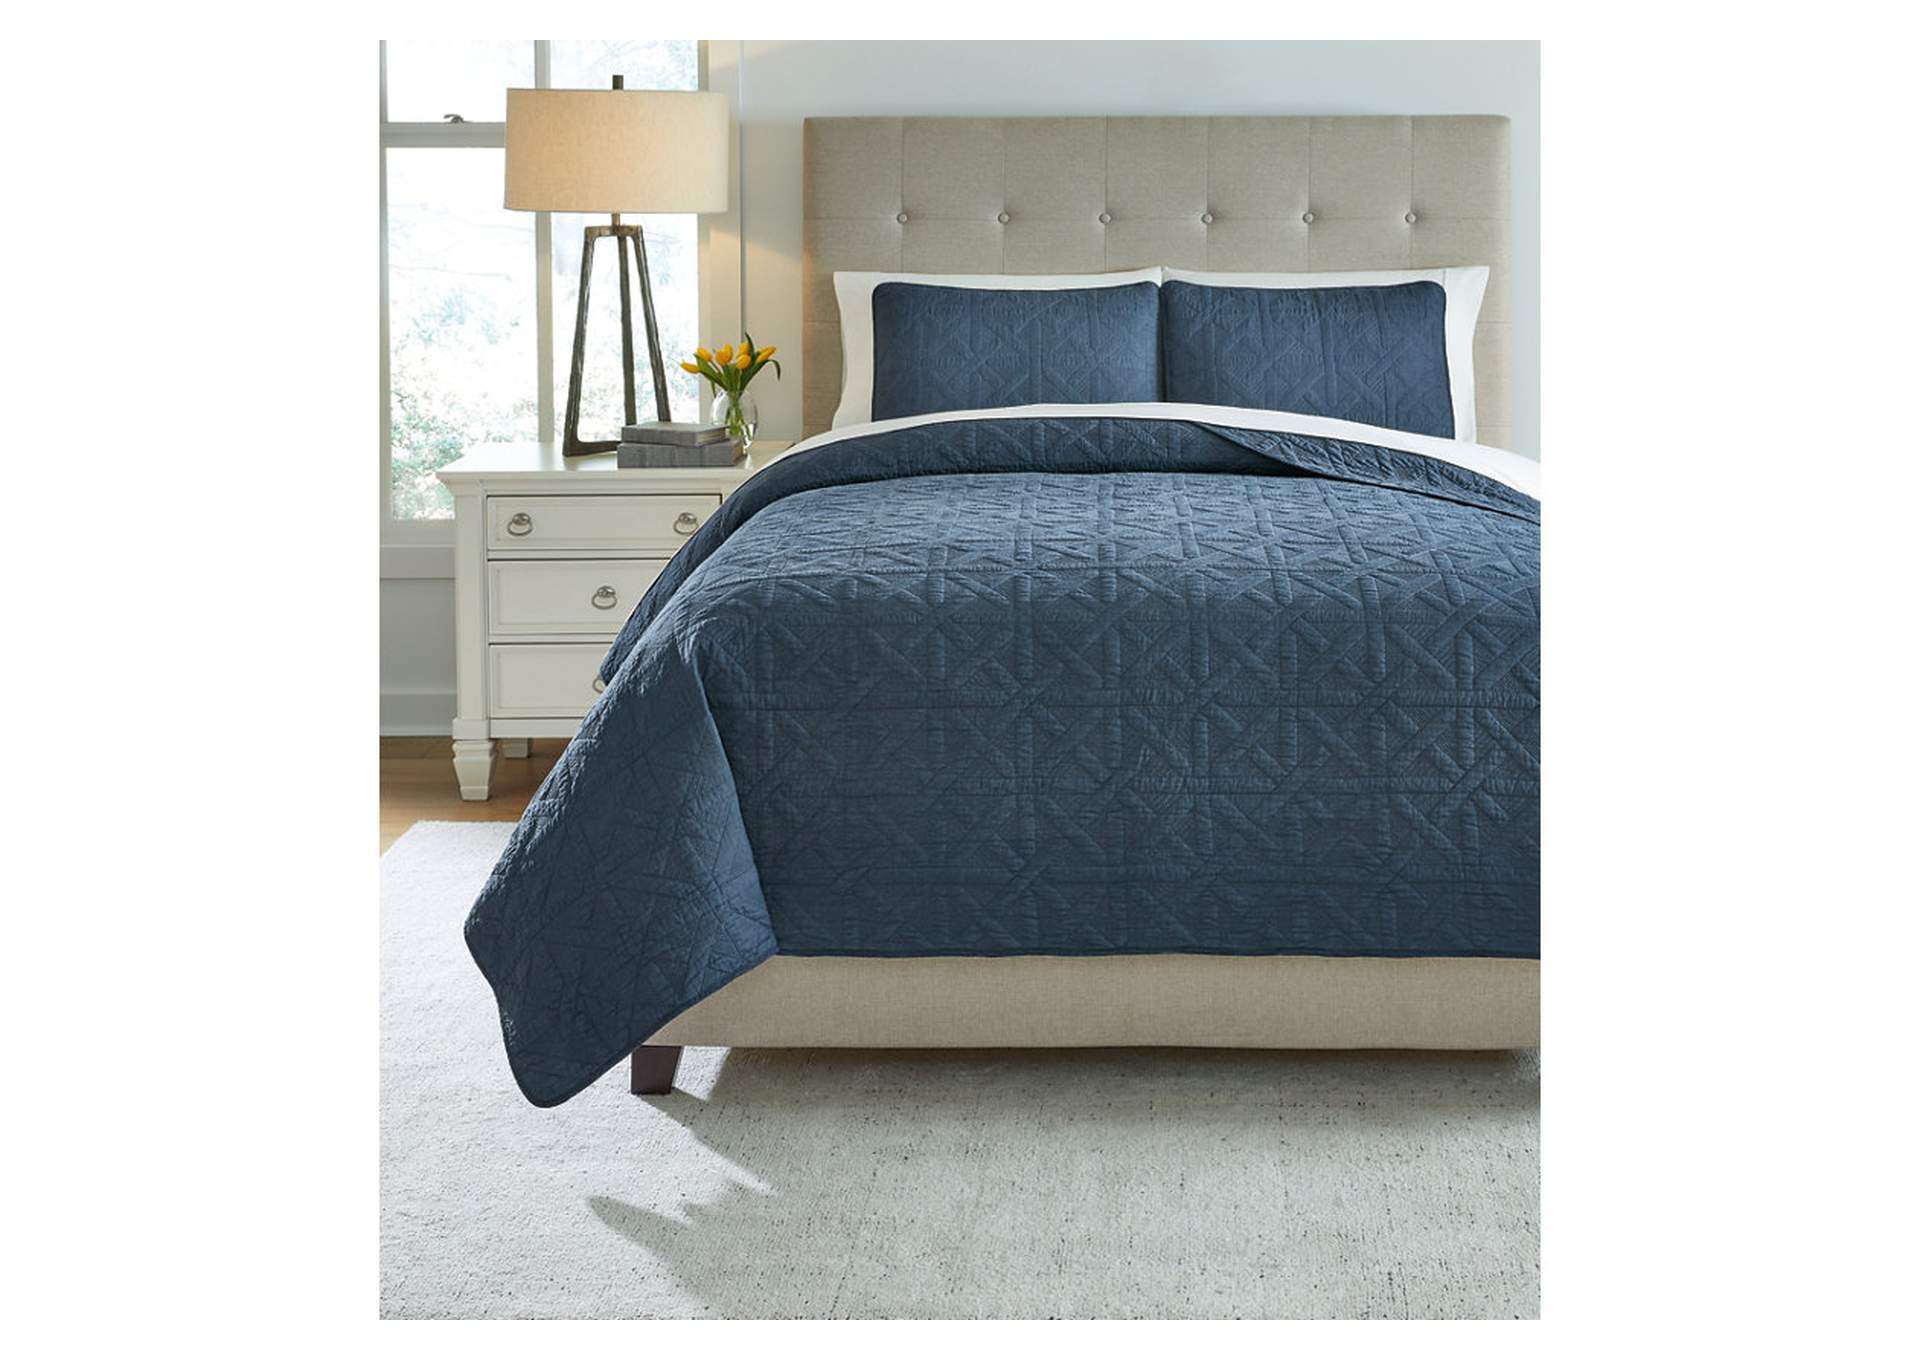 Guslea King Coverlet Set,Signature Design By Ashley